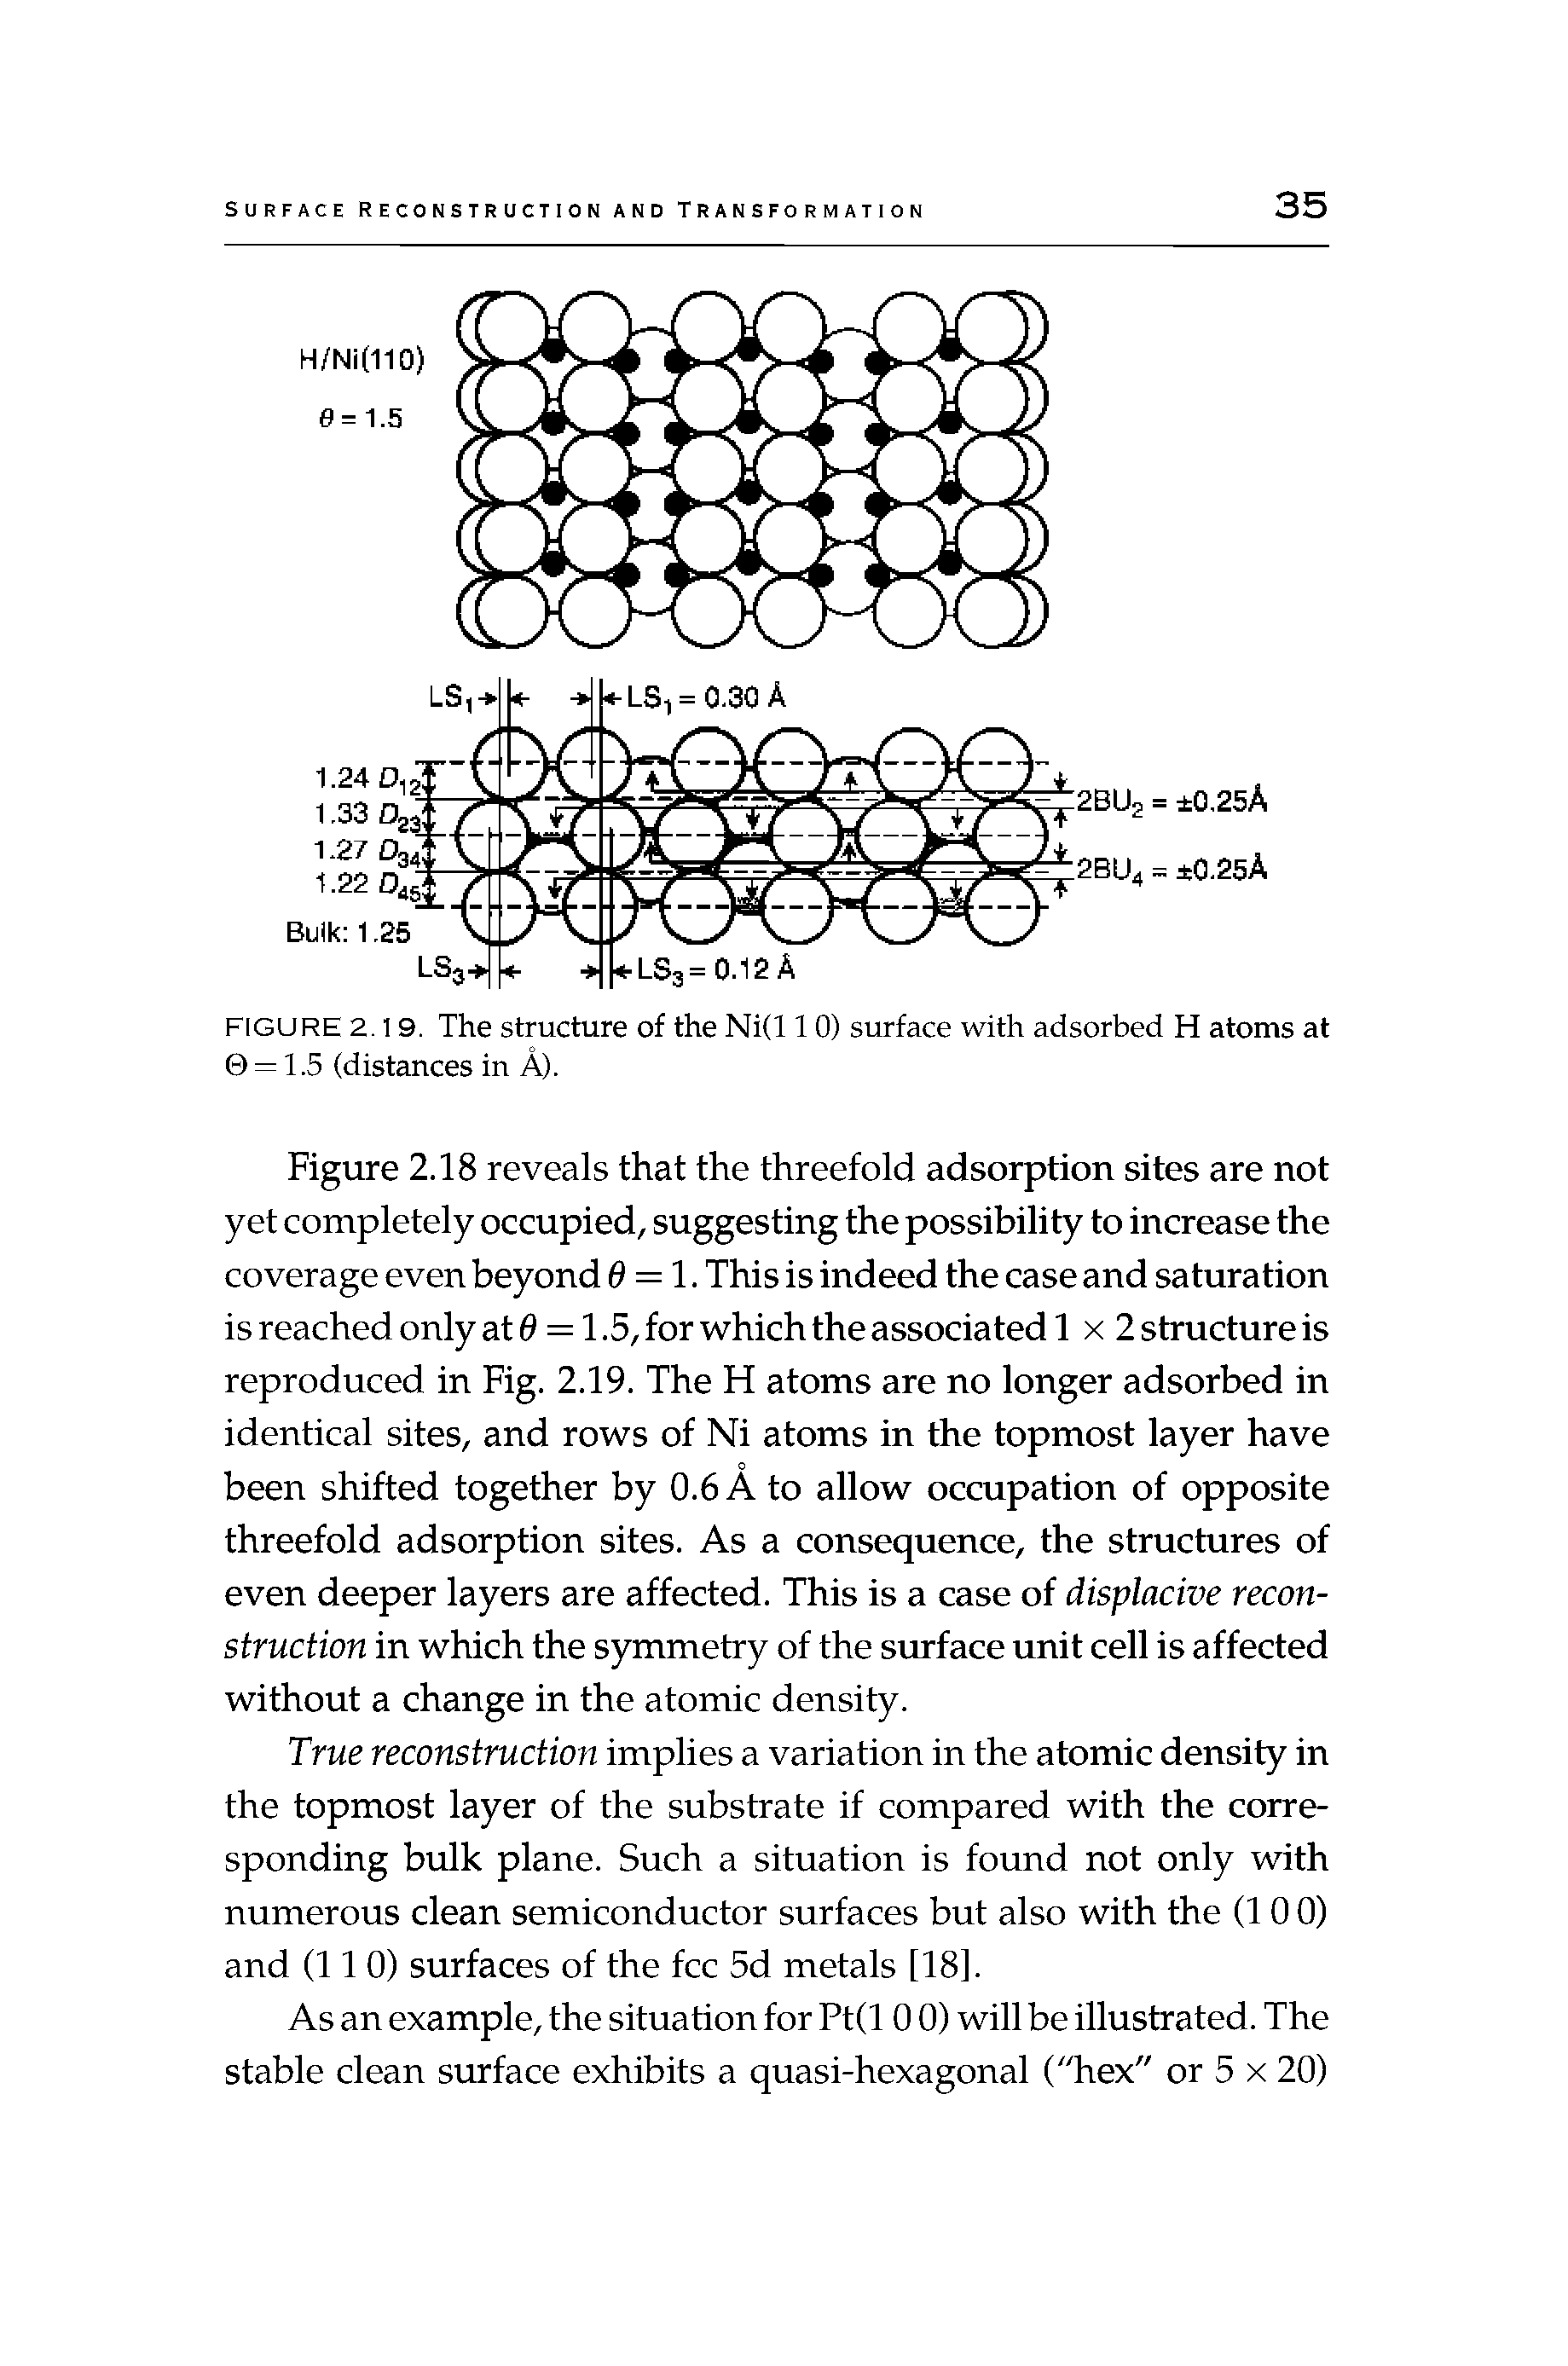 Figure 2.18 reveals that the threefold adsorption sites are not yet completely occupied, suggesting the possibility to increase the coverage even beyond 0 = 1. This is indeed the case and saturation is reached only at0 = 1.5,forwhichtheassociatedl x 2structureis reproduced in Fig. 2.19. The H atoms are no longer adsorbed in identical sites, and rows of Ni atoms in the topmost layer have been shifted together by 0.6 A to allow occupation of opposite threefold adsorption sites. As a consequence, the structures of even deeper layers are affected. This is a case of displacive reconstruction in which the symmetry of the surface unit cell is affected without a change in the atomic density.